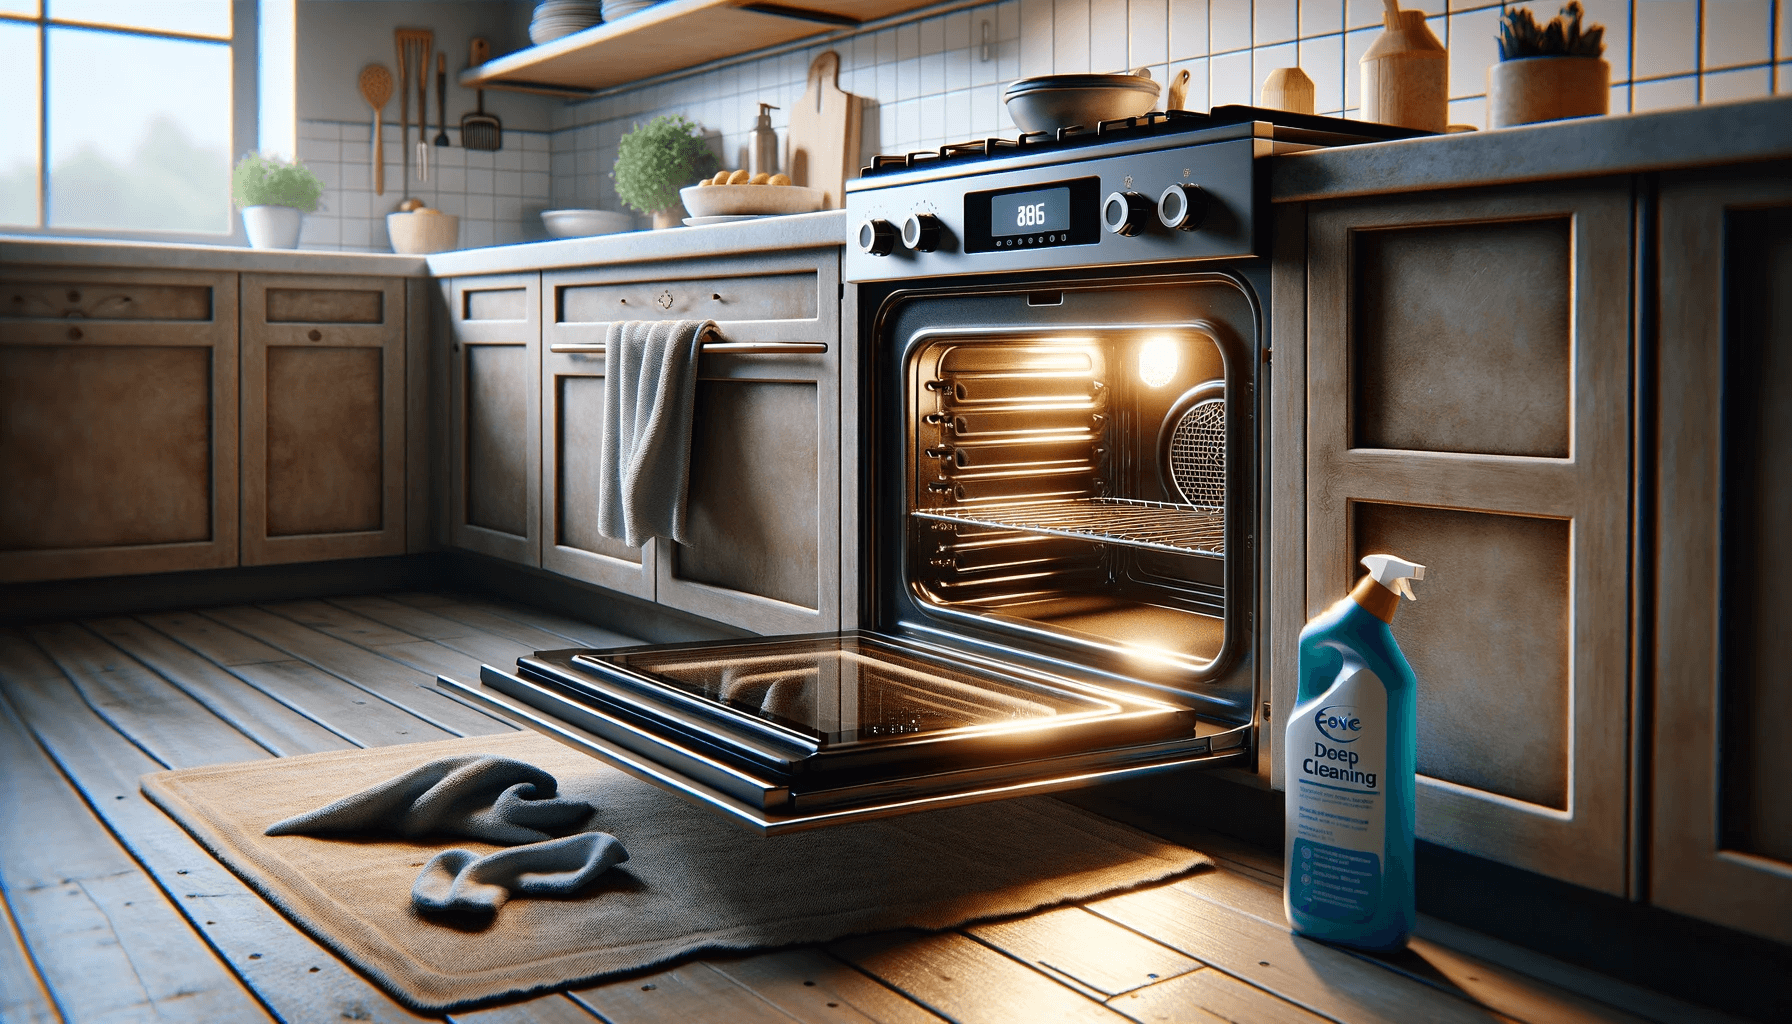 Oven and kitchen maintenance tips